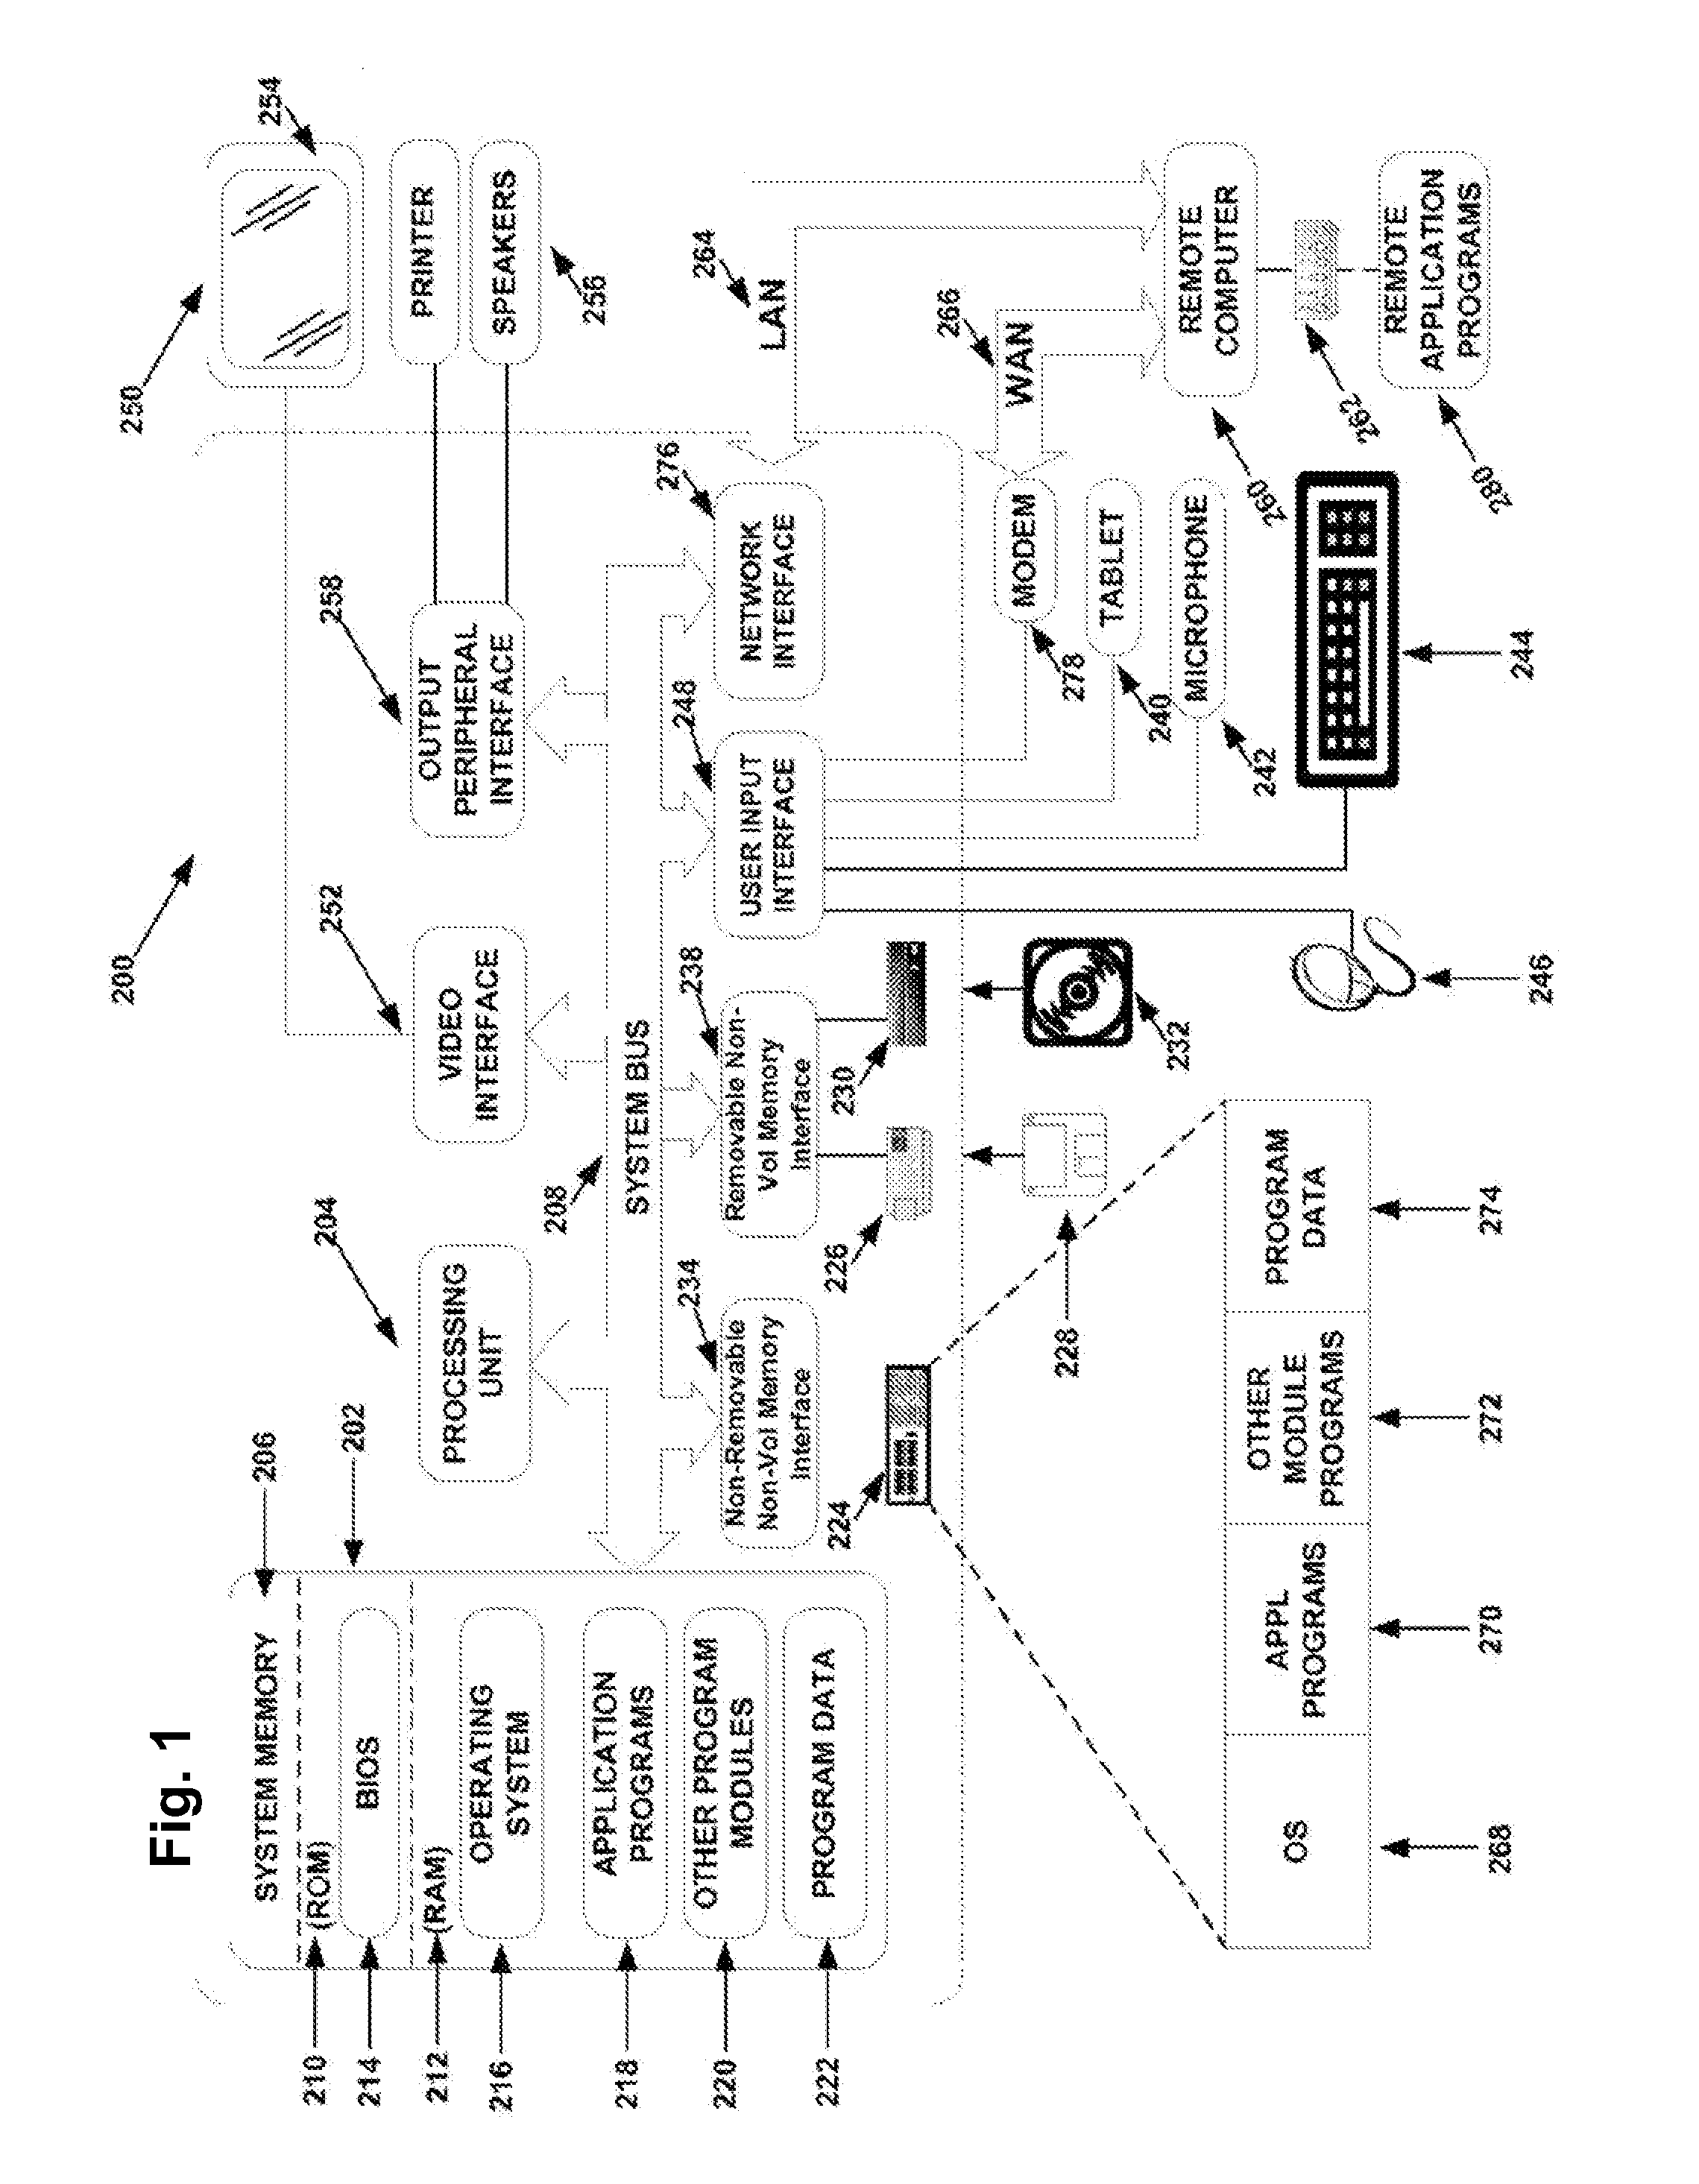 Method, system, and storage device for an online content marketplace and exchange